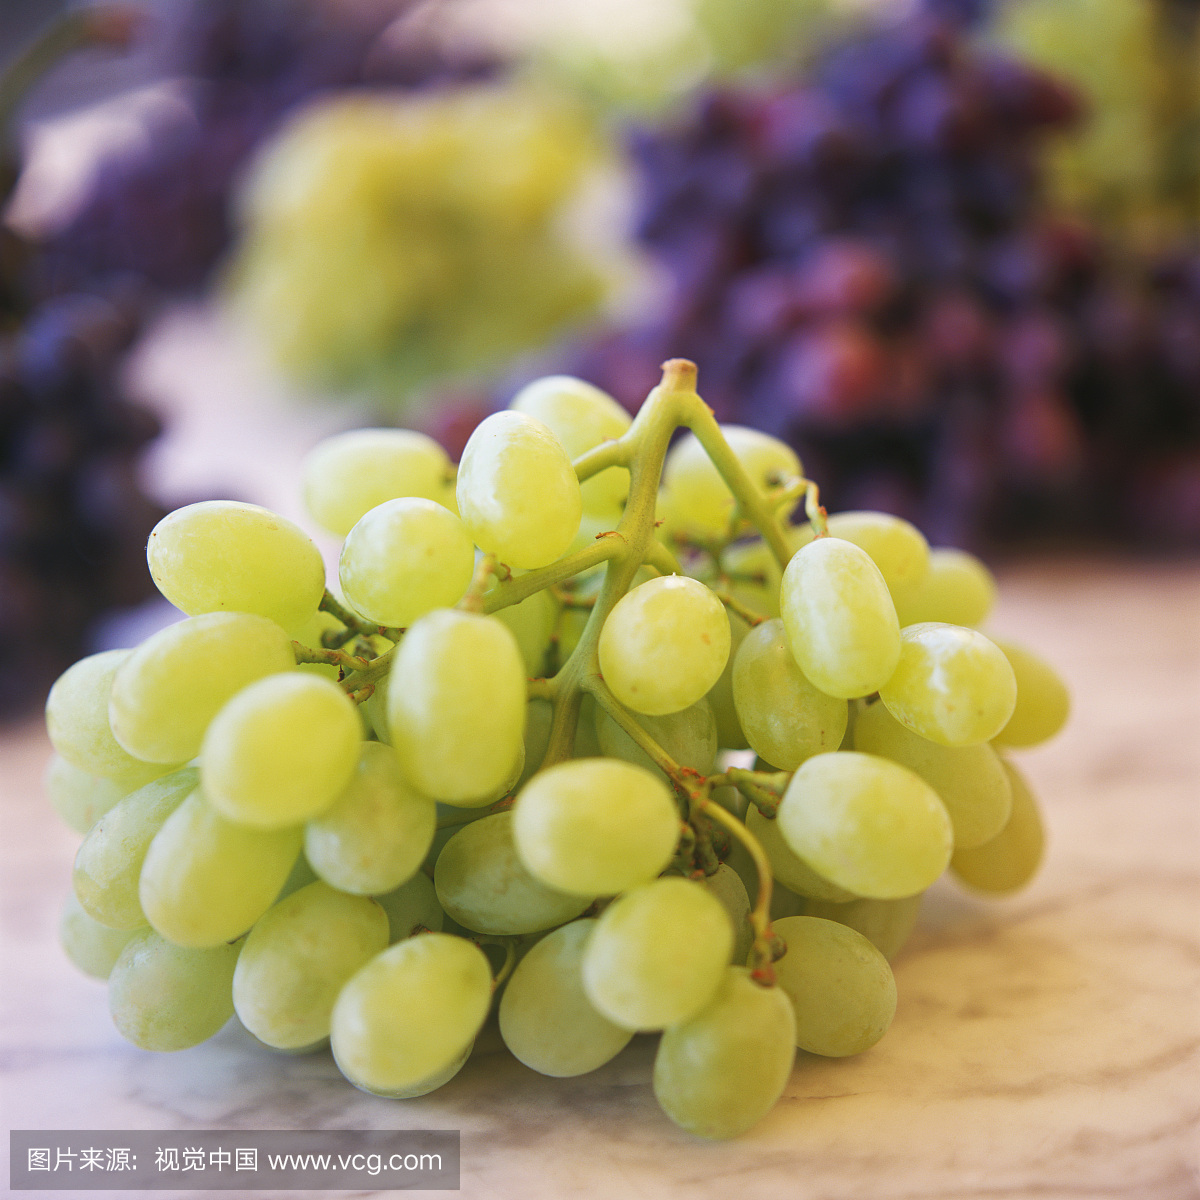 Green grapes on marble platter in front of mixed